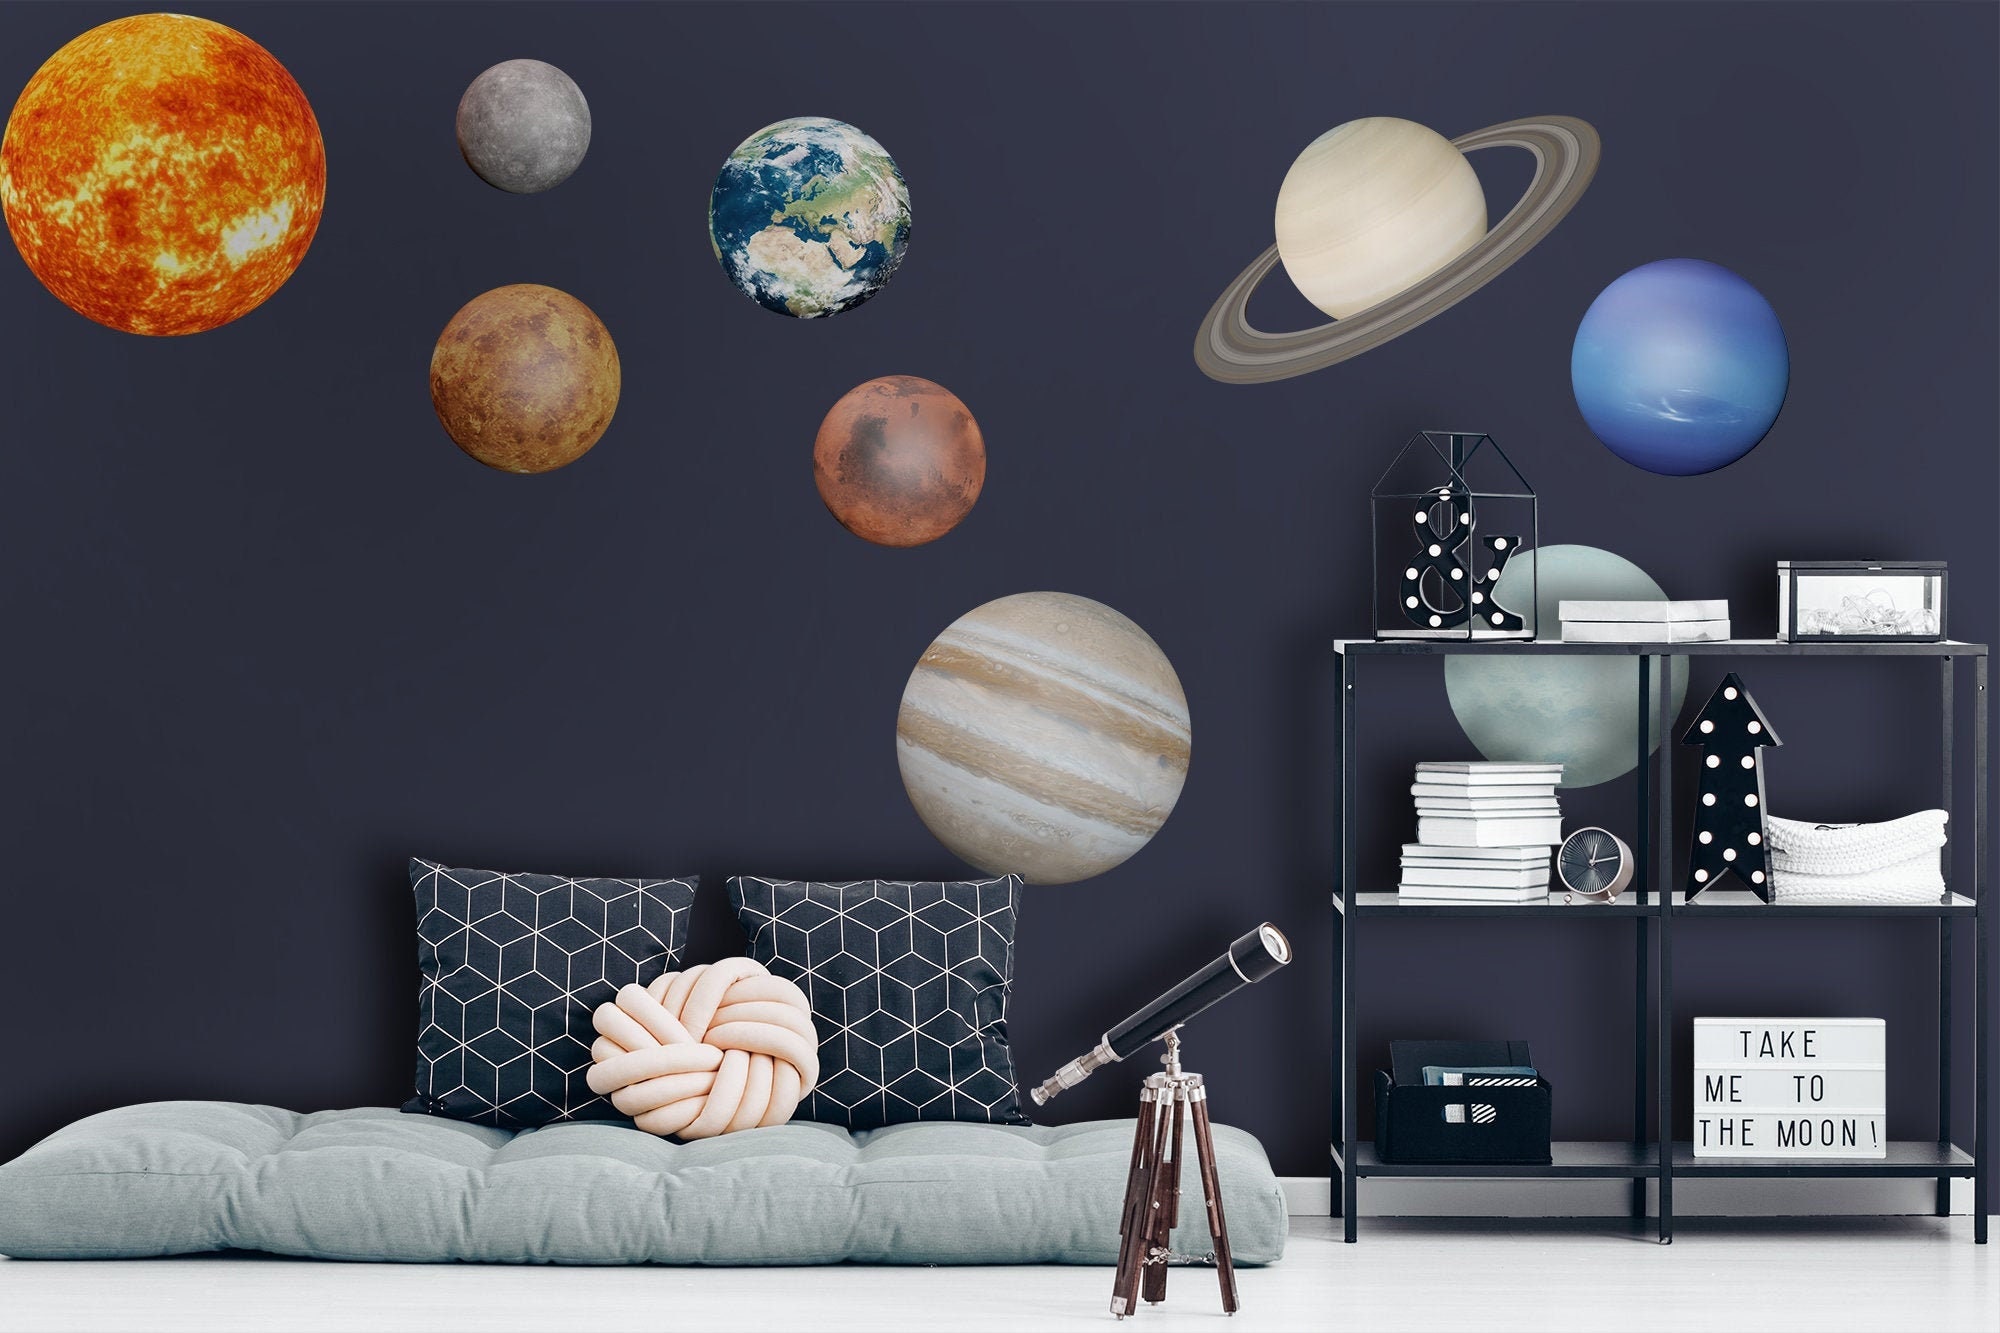 Planet Wall Stickers Solar System Wall Stickers Space Wall Stickers SSYS 01 